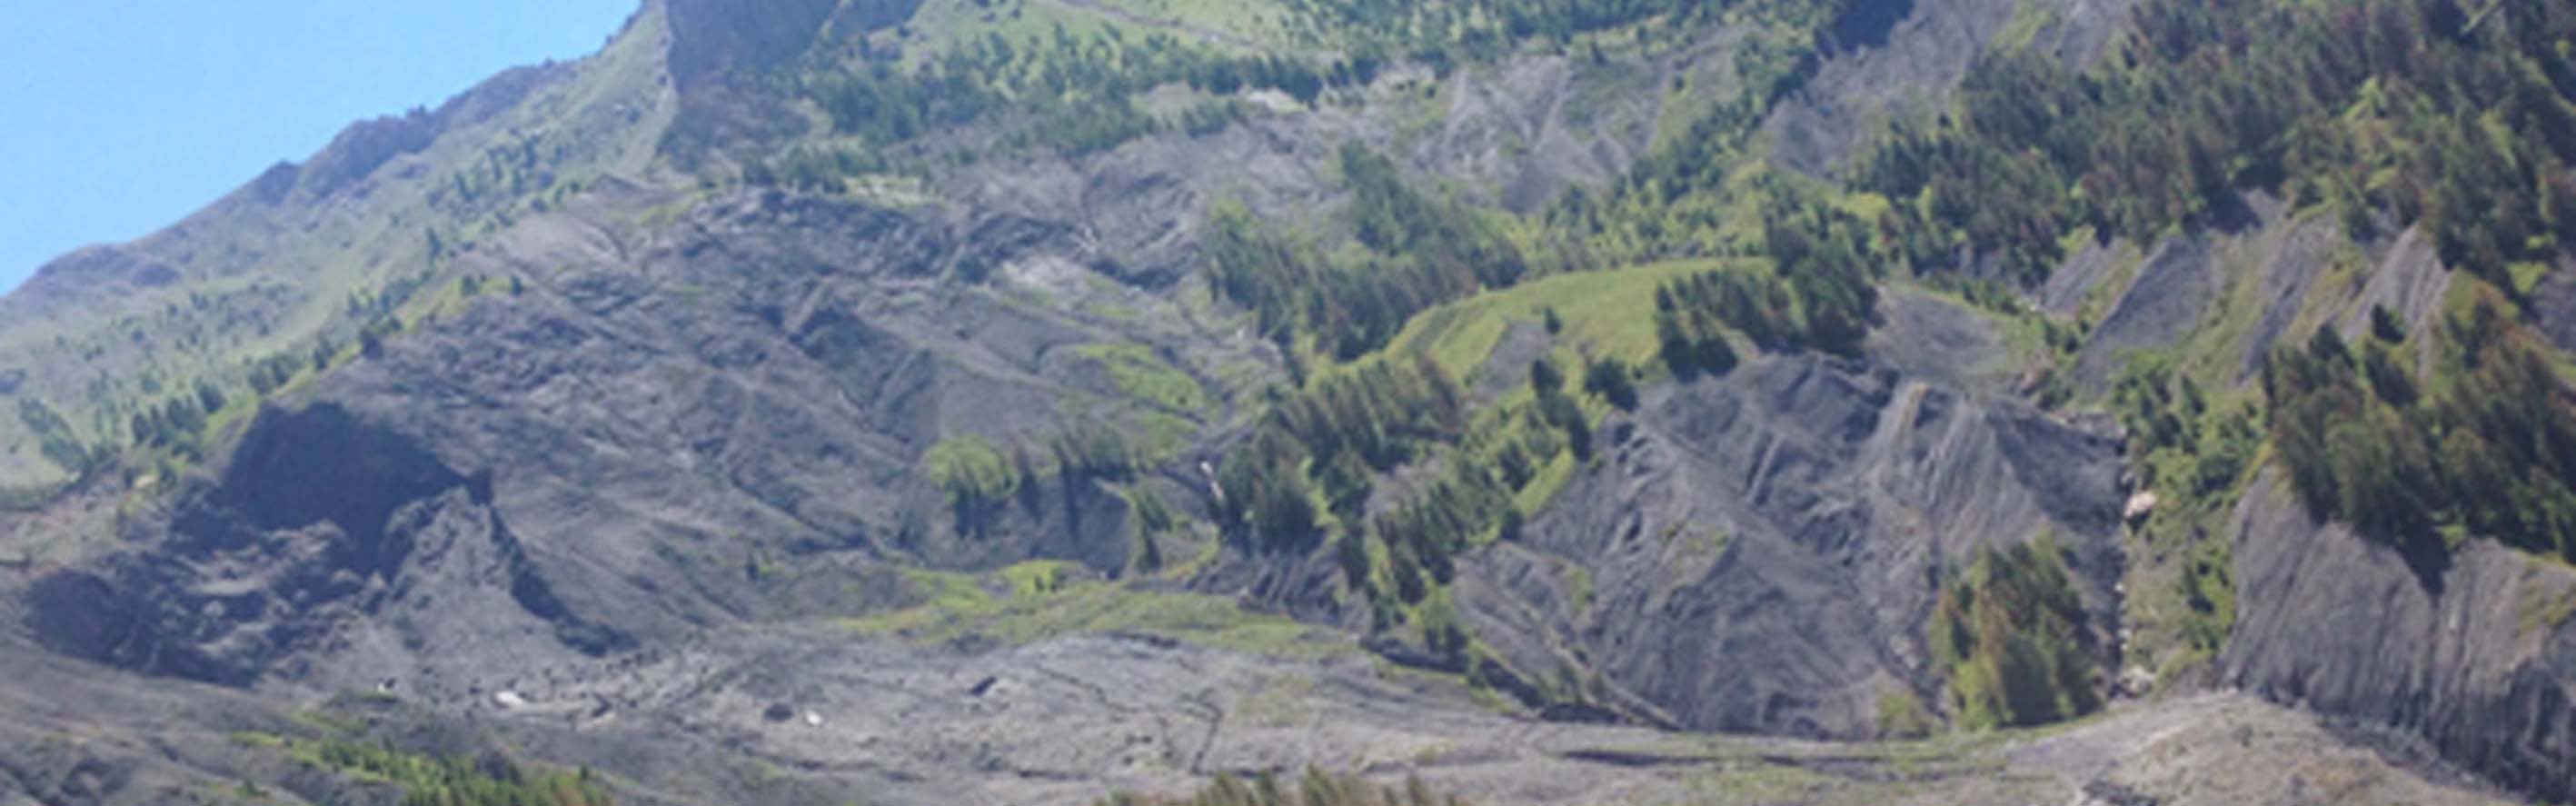 Super-Sauze landslide: view of the accumulation zone in 2016 